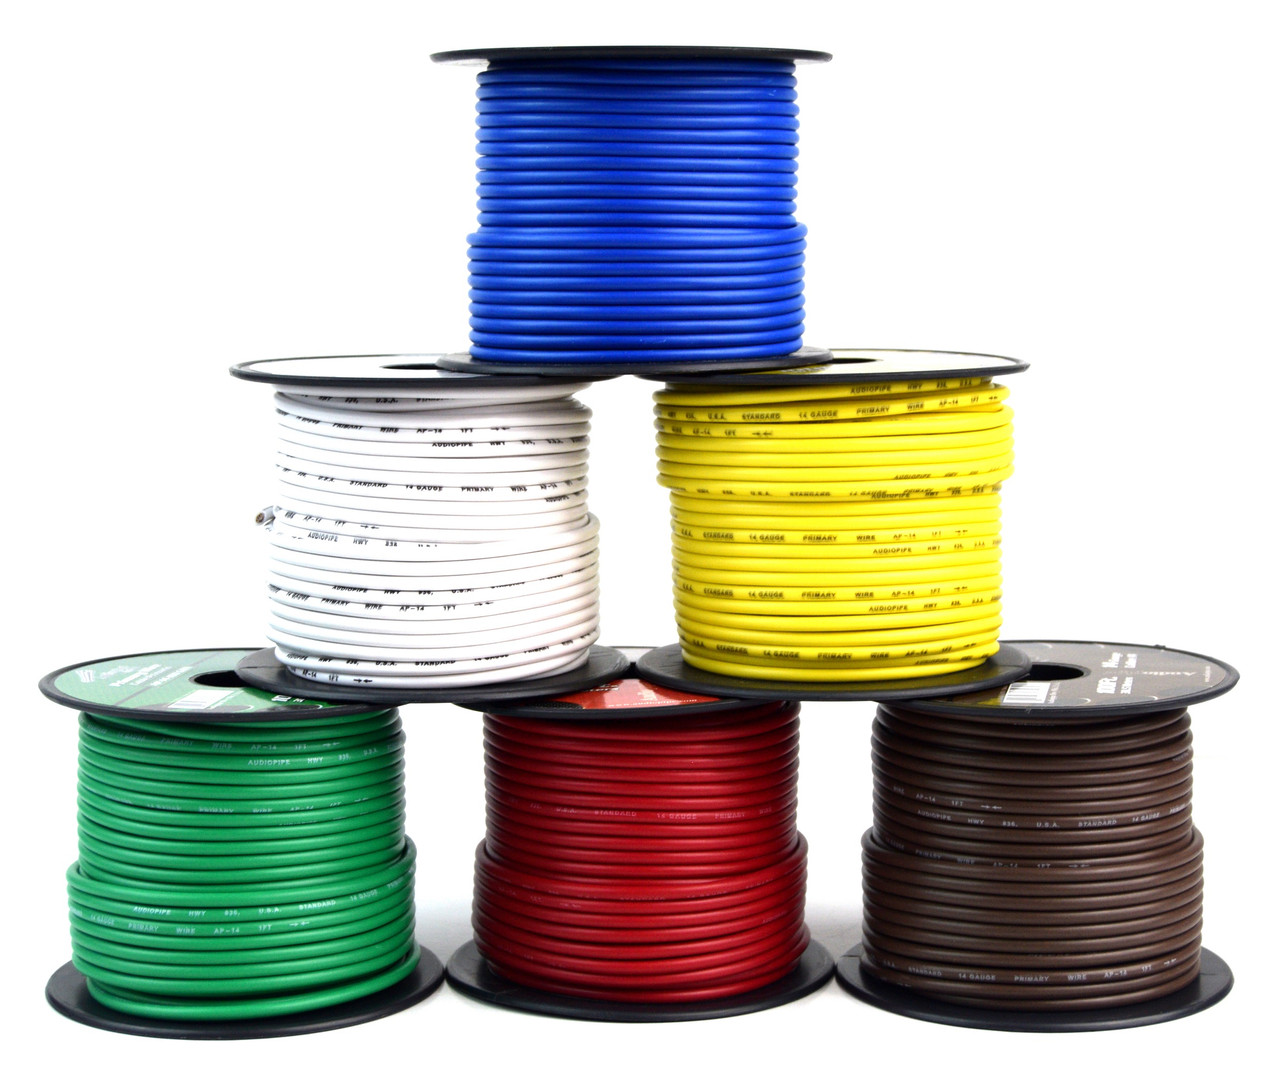 14 Gauge 100FT Spool Remote Wire Copper Clad Single Conductor 6 Primary Colors 